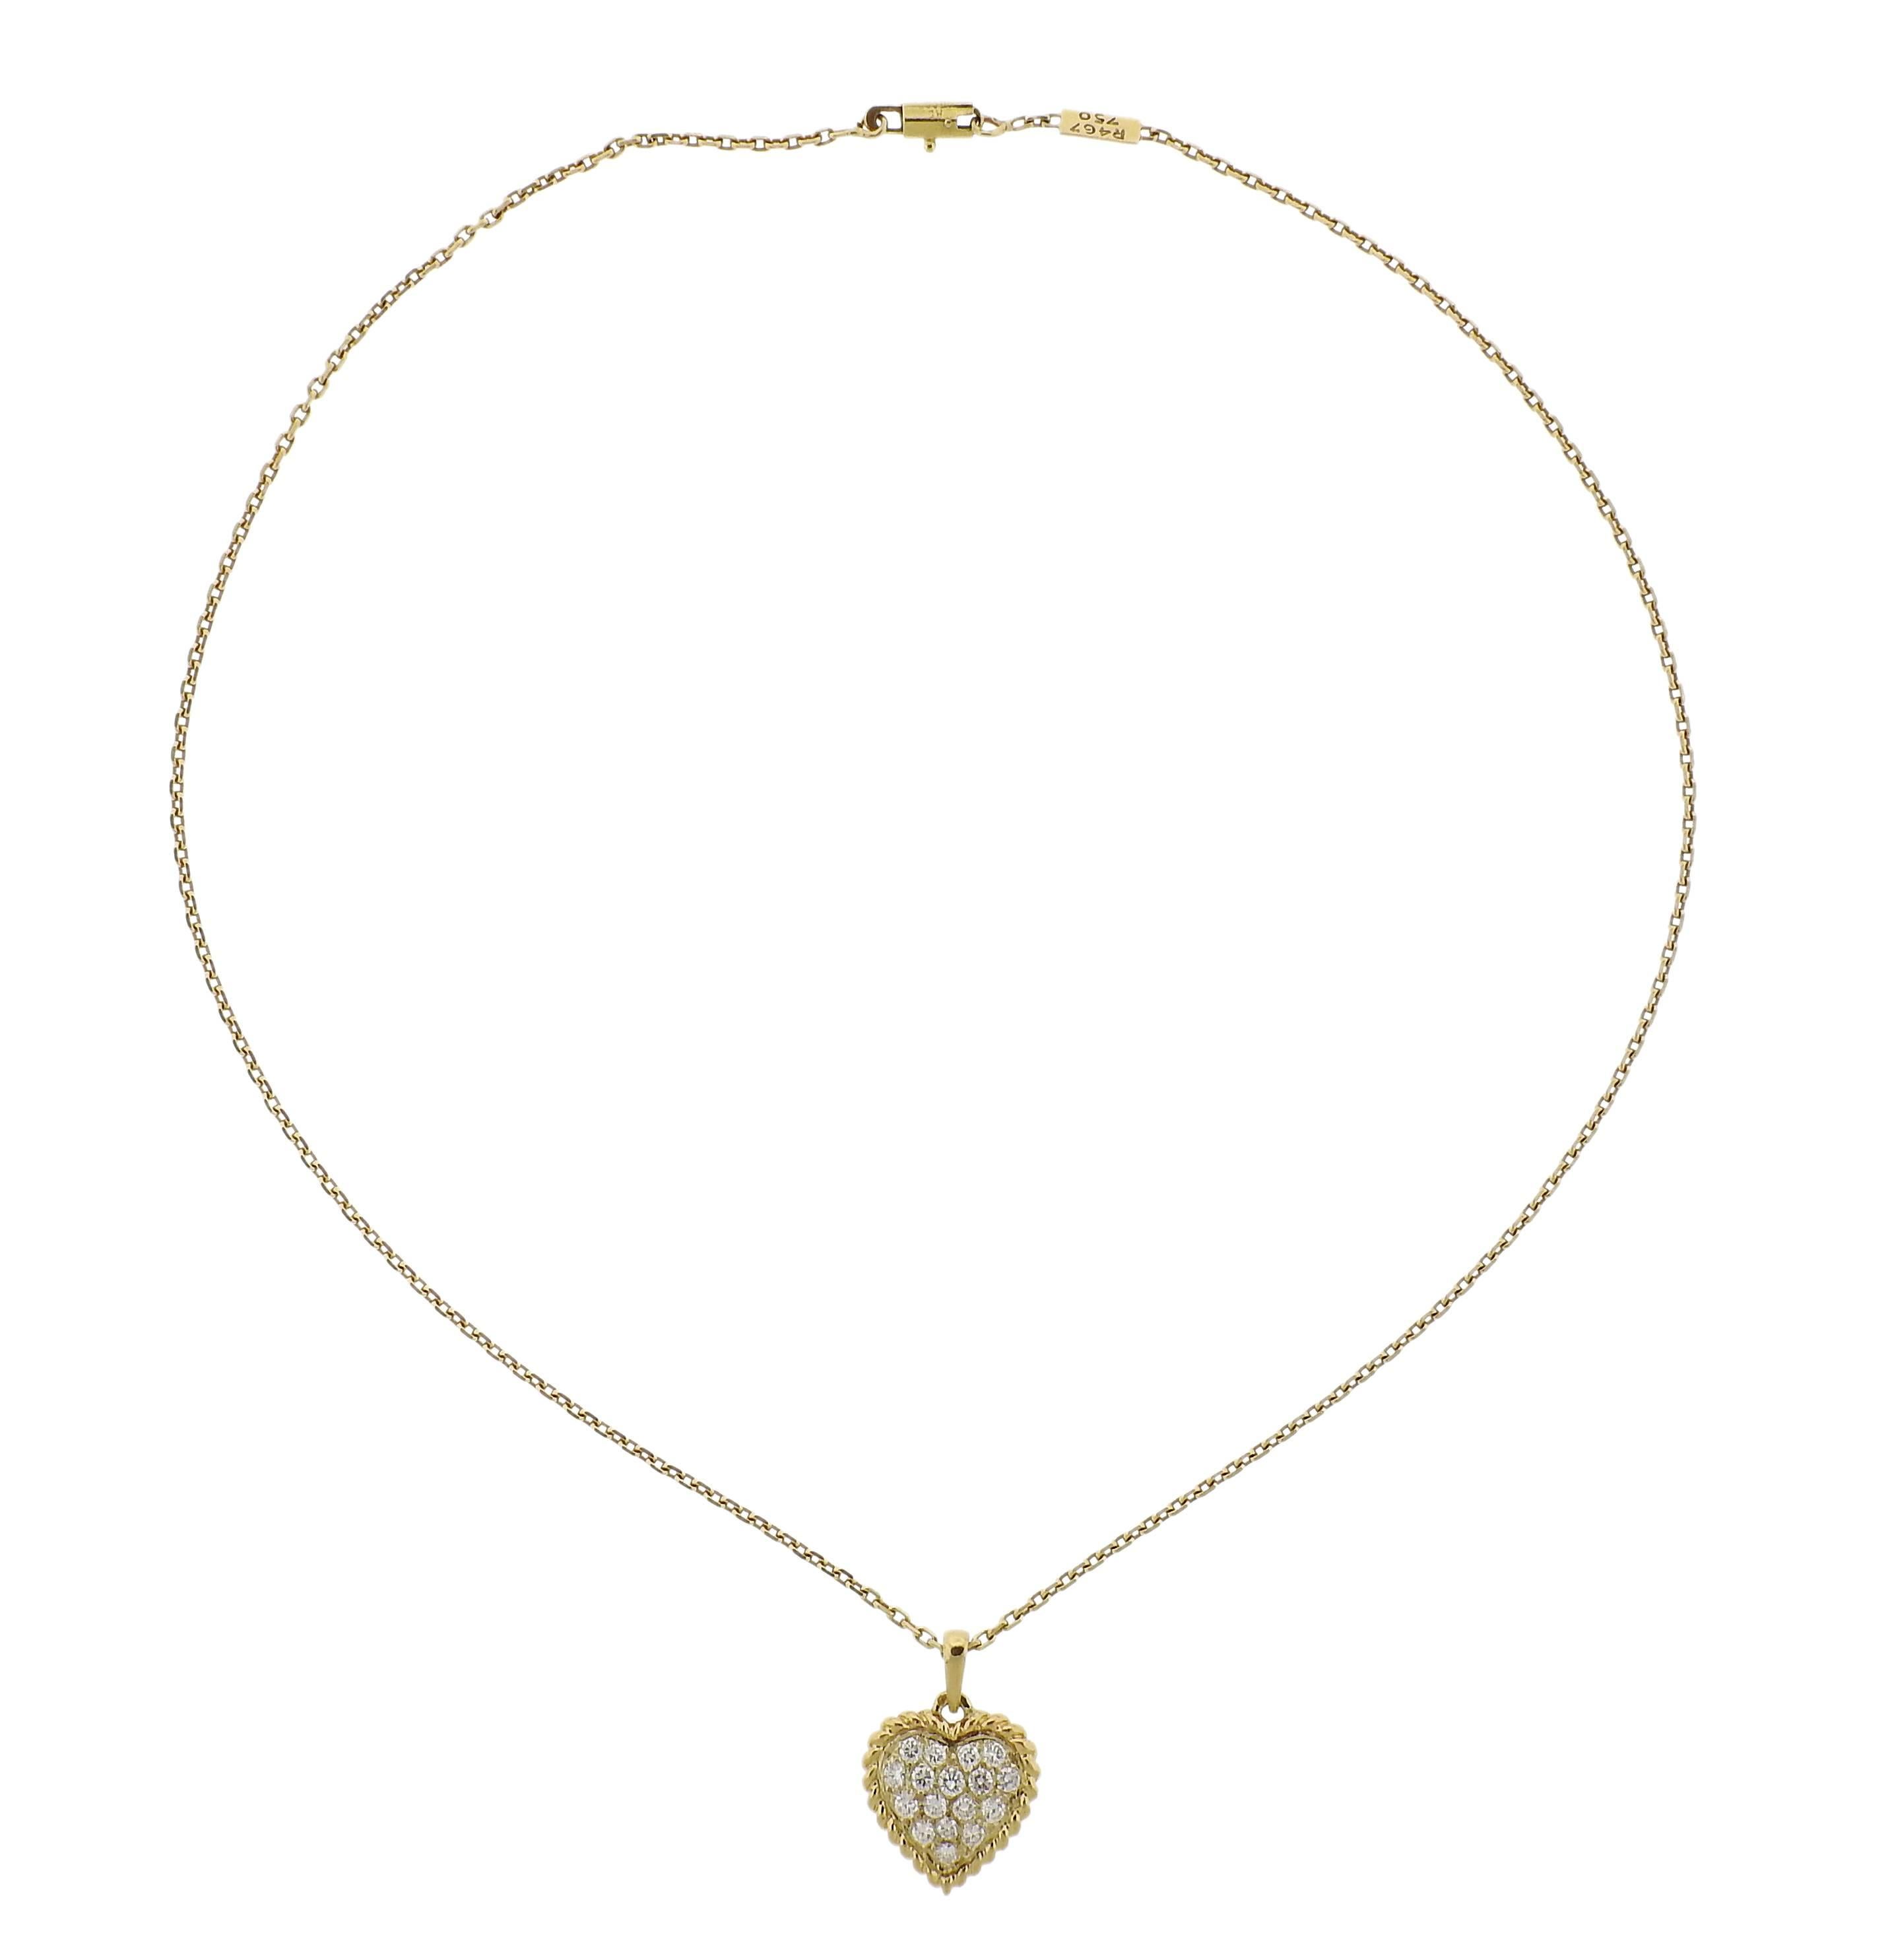 Delicate 18k yellow gold necklace with heart pendant, decorated with approximately 0.75ctw in diamonds. Necklace is 18 1/4